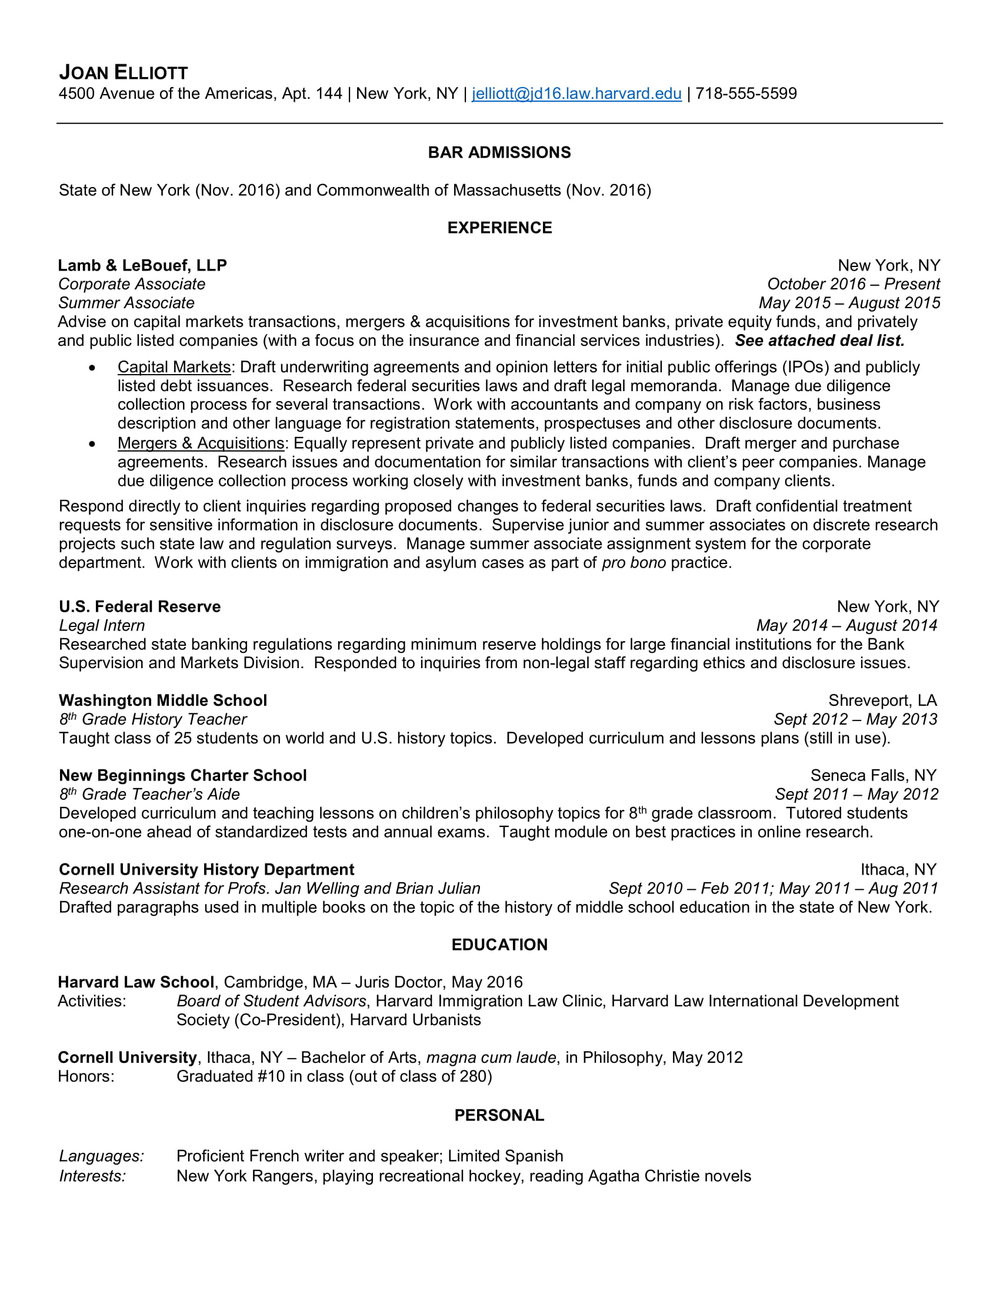 Law School Sample attorney Resume with Years Of Experience 6 Quick Tips for the Perfect Legal Resume â Gridline Search   …